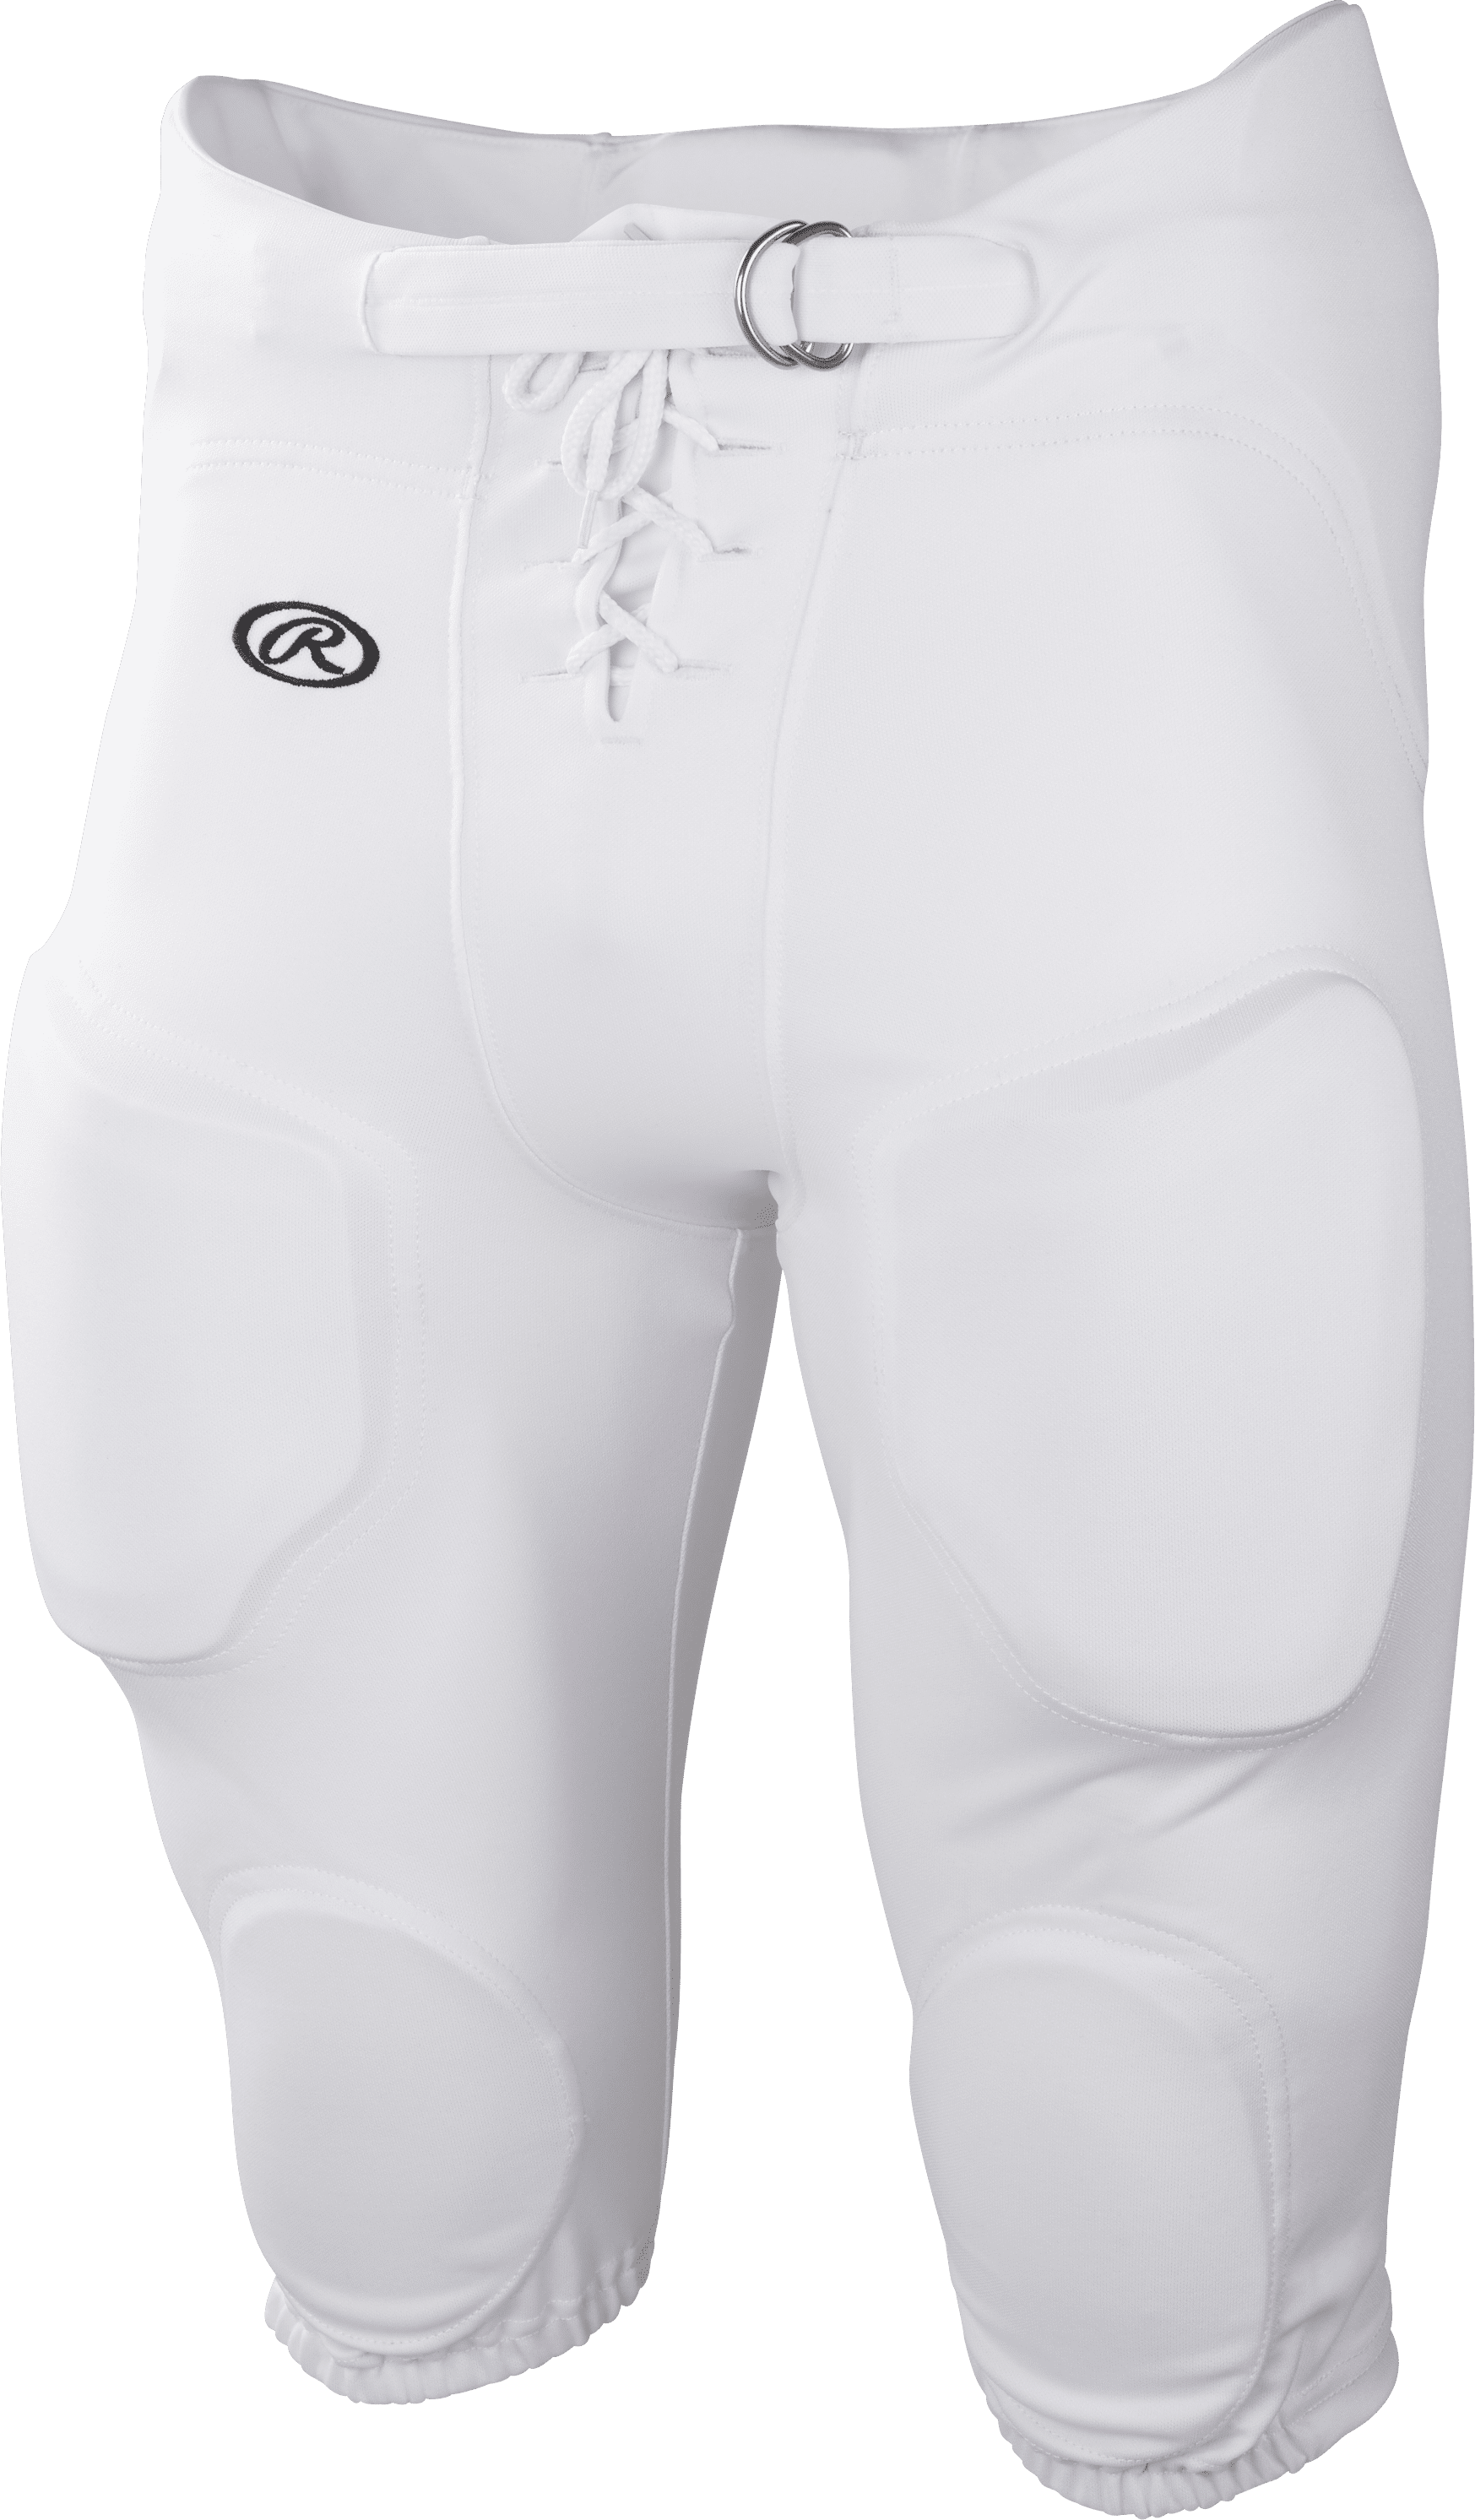 Rawlings Integrated Football Pants F3500P Adult Sizes S-XL White Free Shipping! 